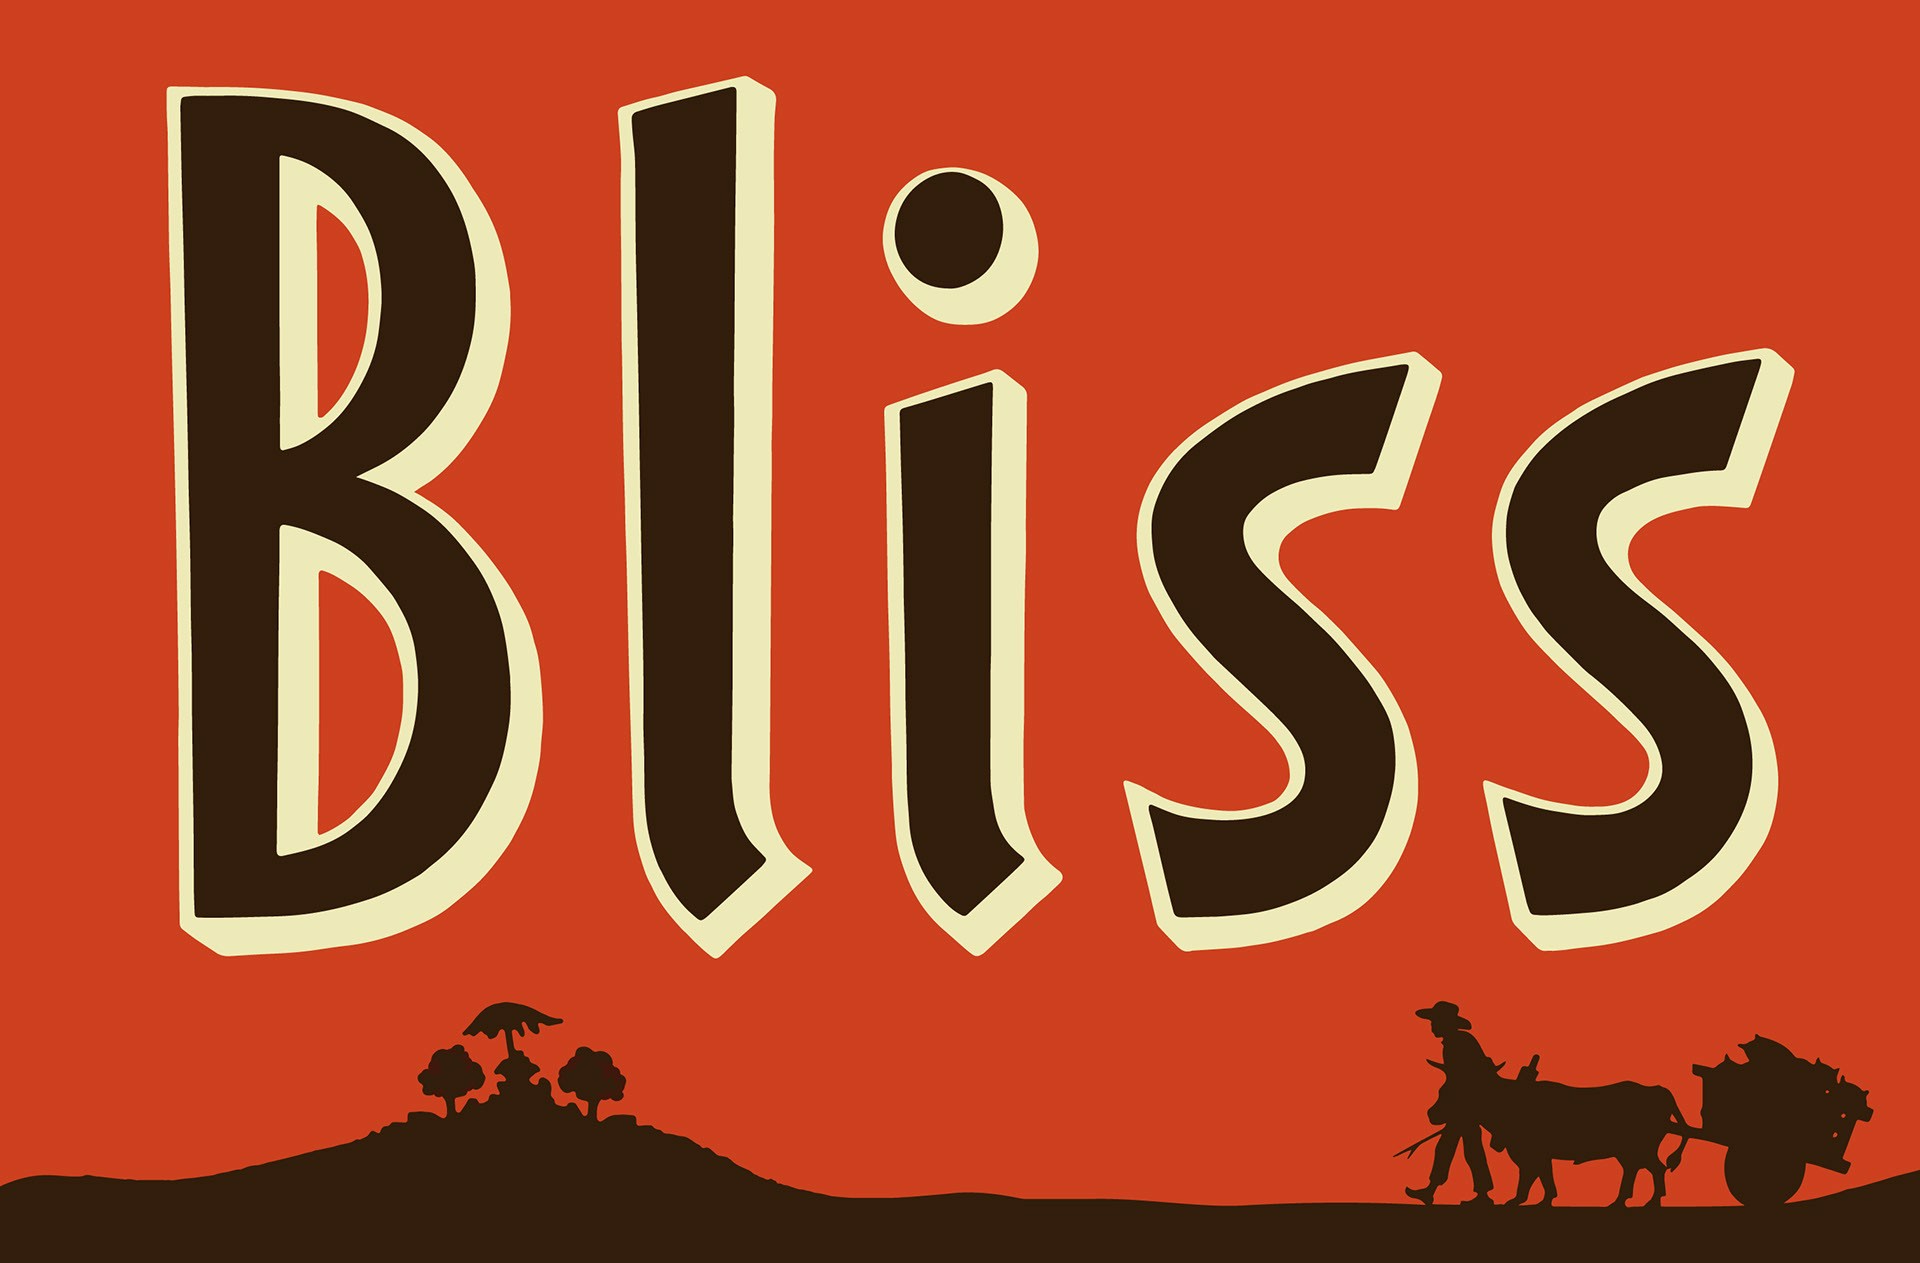 Bliss by Mark Hosford